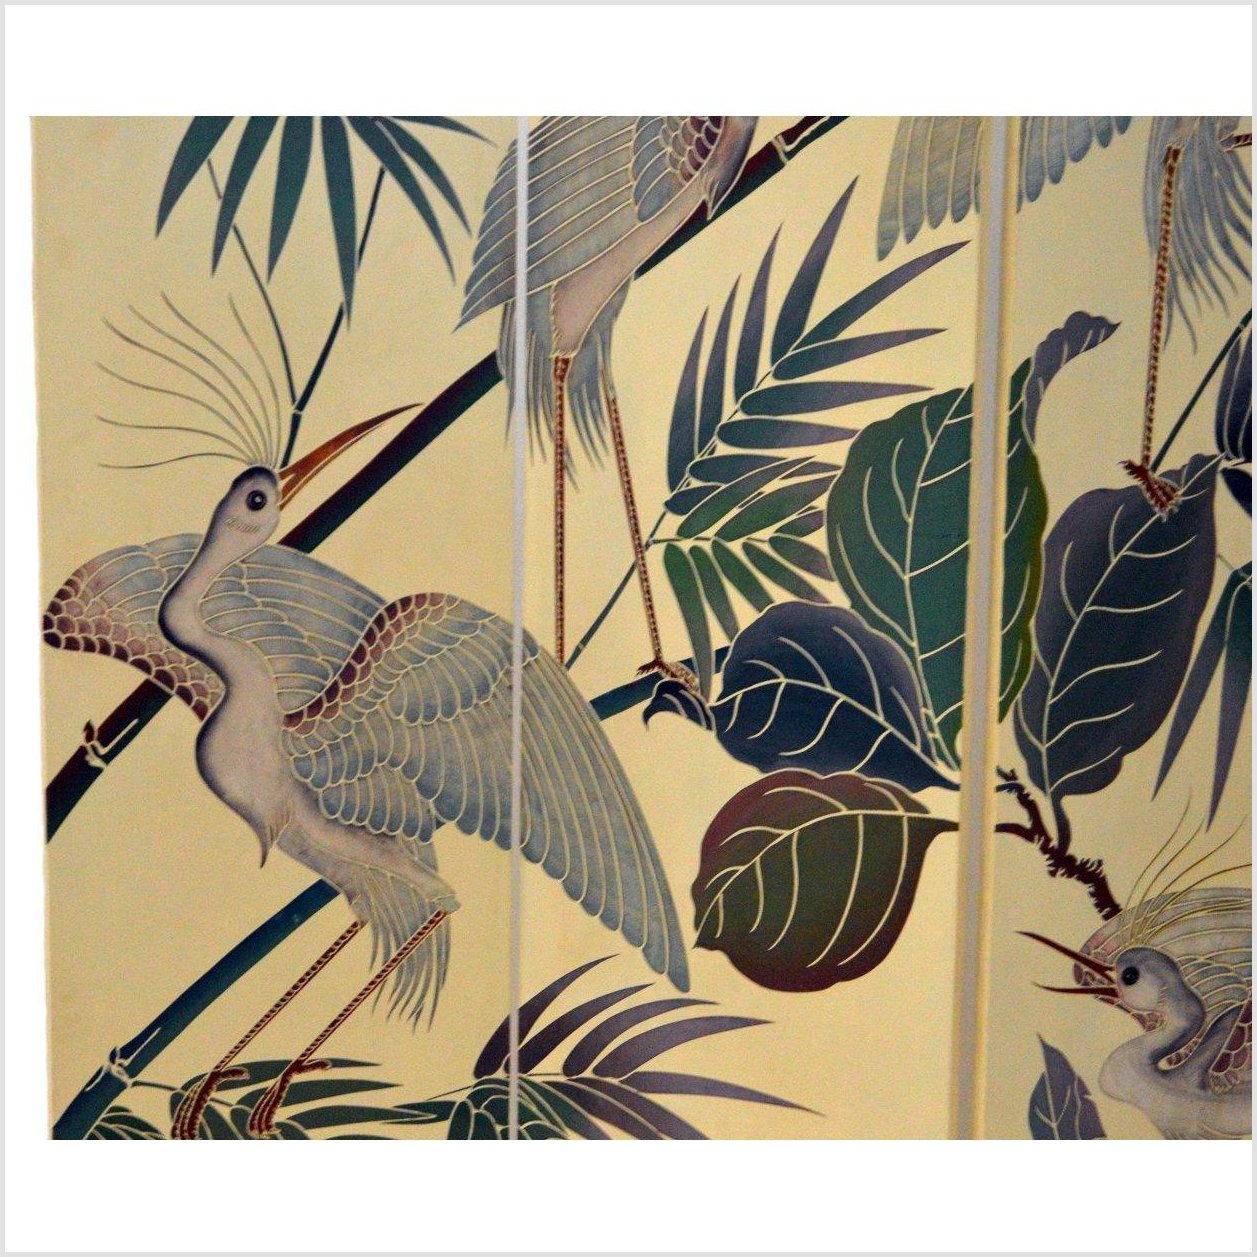 4-Panel Screen Designed with Cranes and Tropical Plants-YN2850-11. Asian & Chinese Furniture, Art, Antiques, Vintage Home Décor for sale at FEA Home